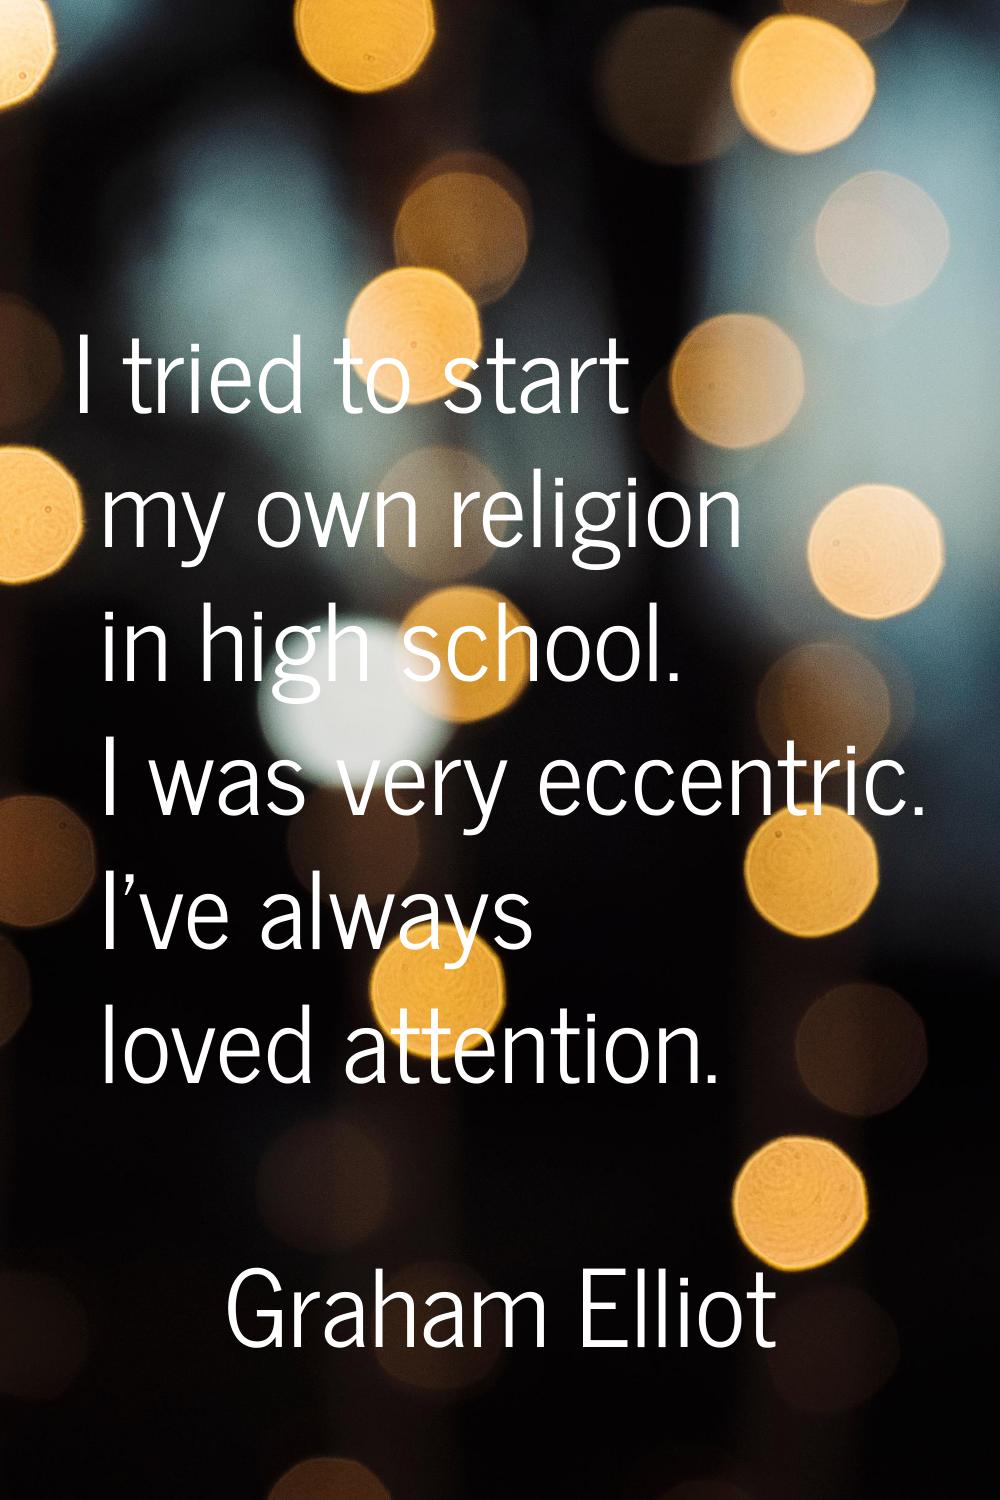 I tried to start my own religion in high school. I was very eccentric. I've always loved attention.